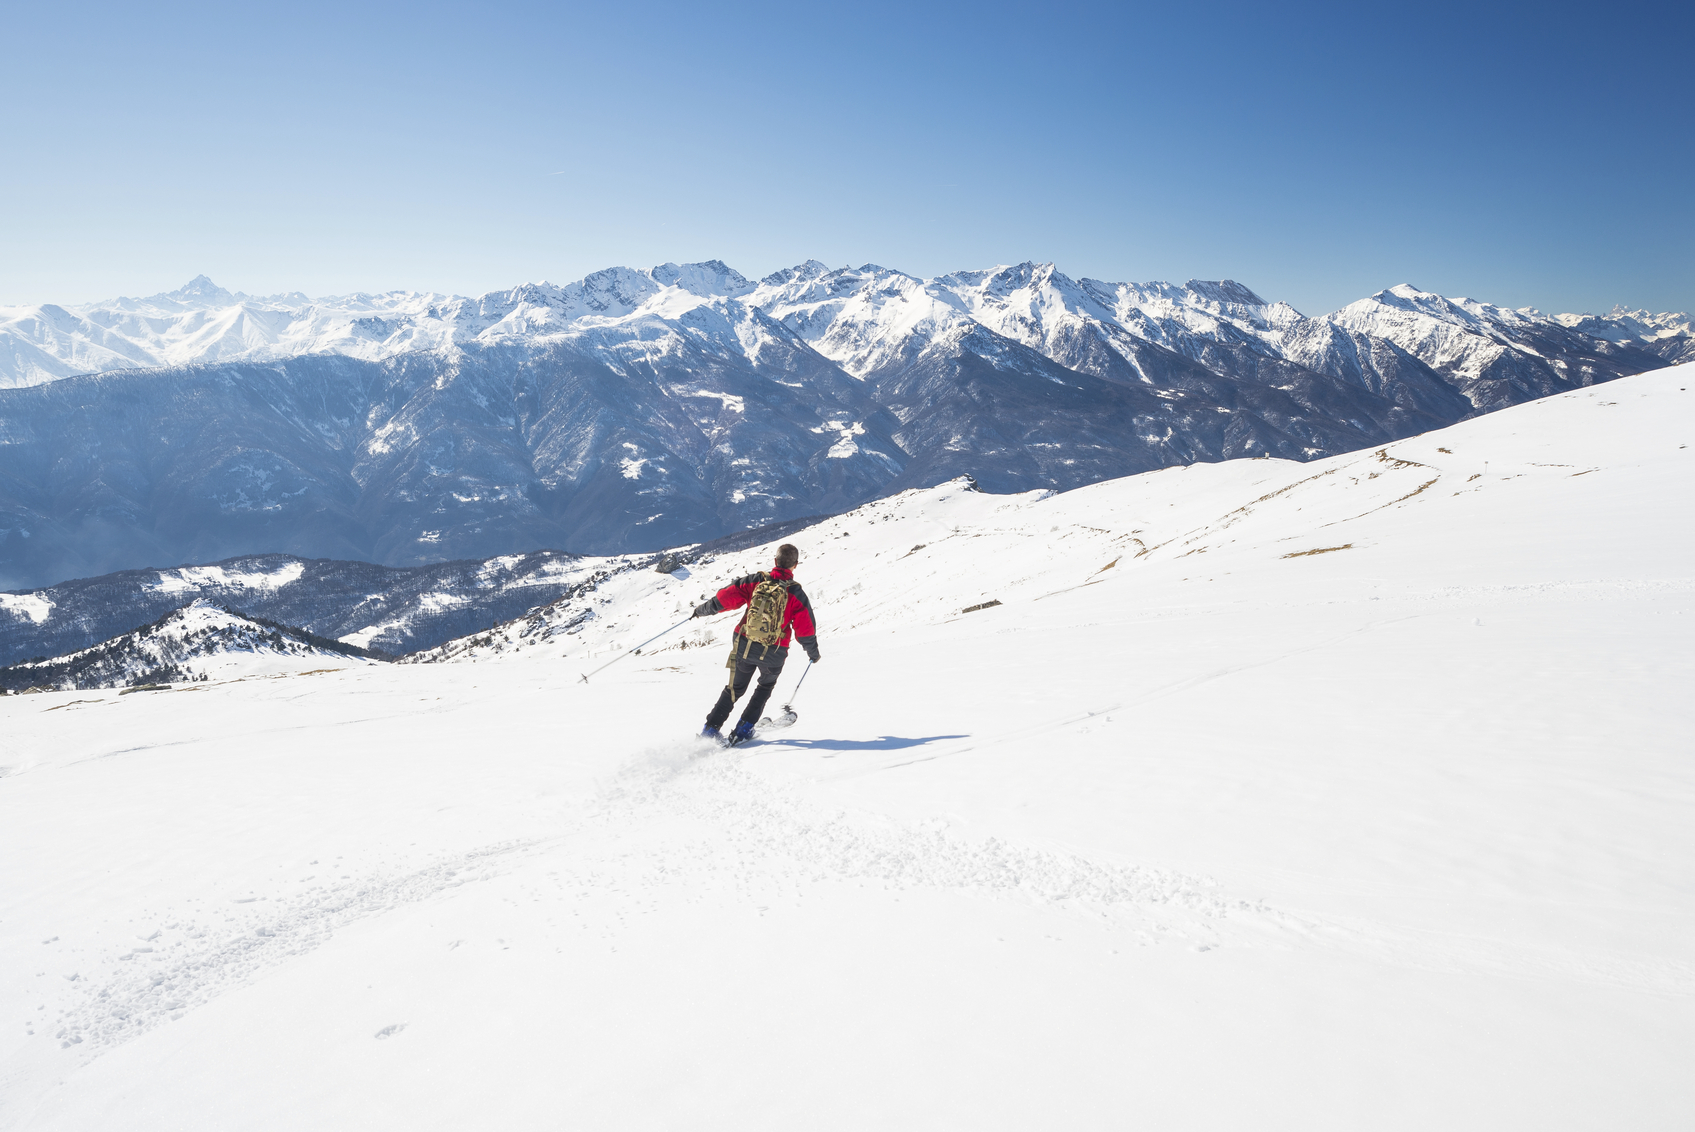 One person skiing downhills on snowy slope in scenic ski resort of the italian Alps, with bright sunny day of late winter season. Majestic mountain peaks in the background.